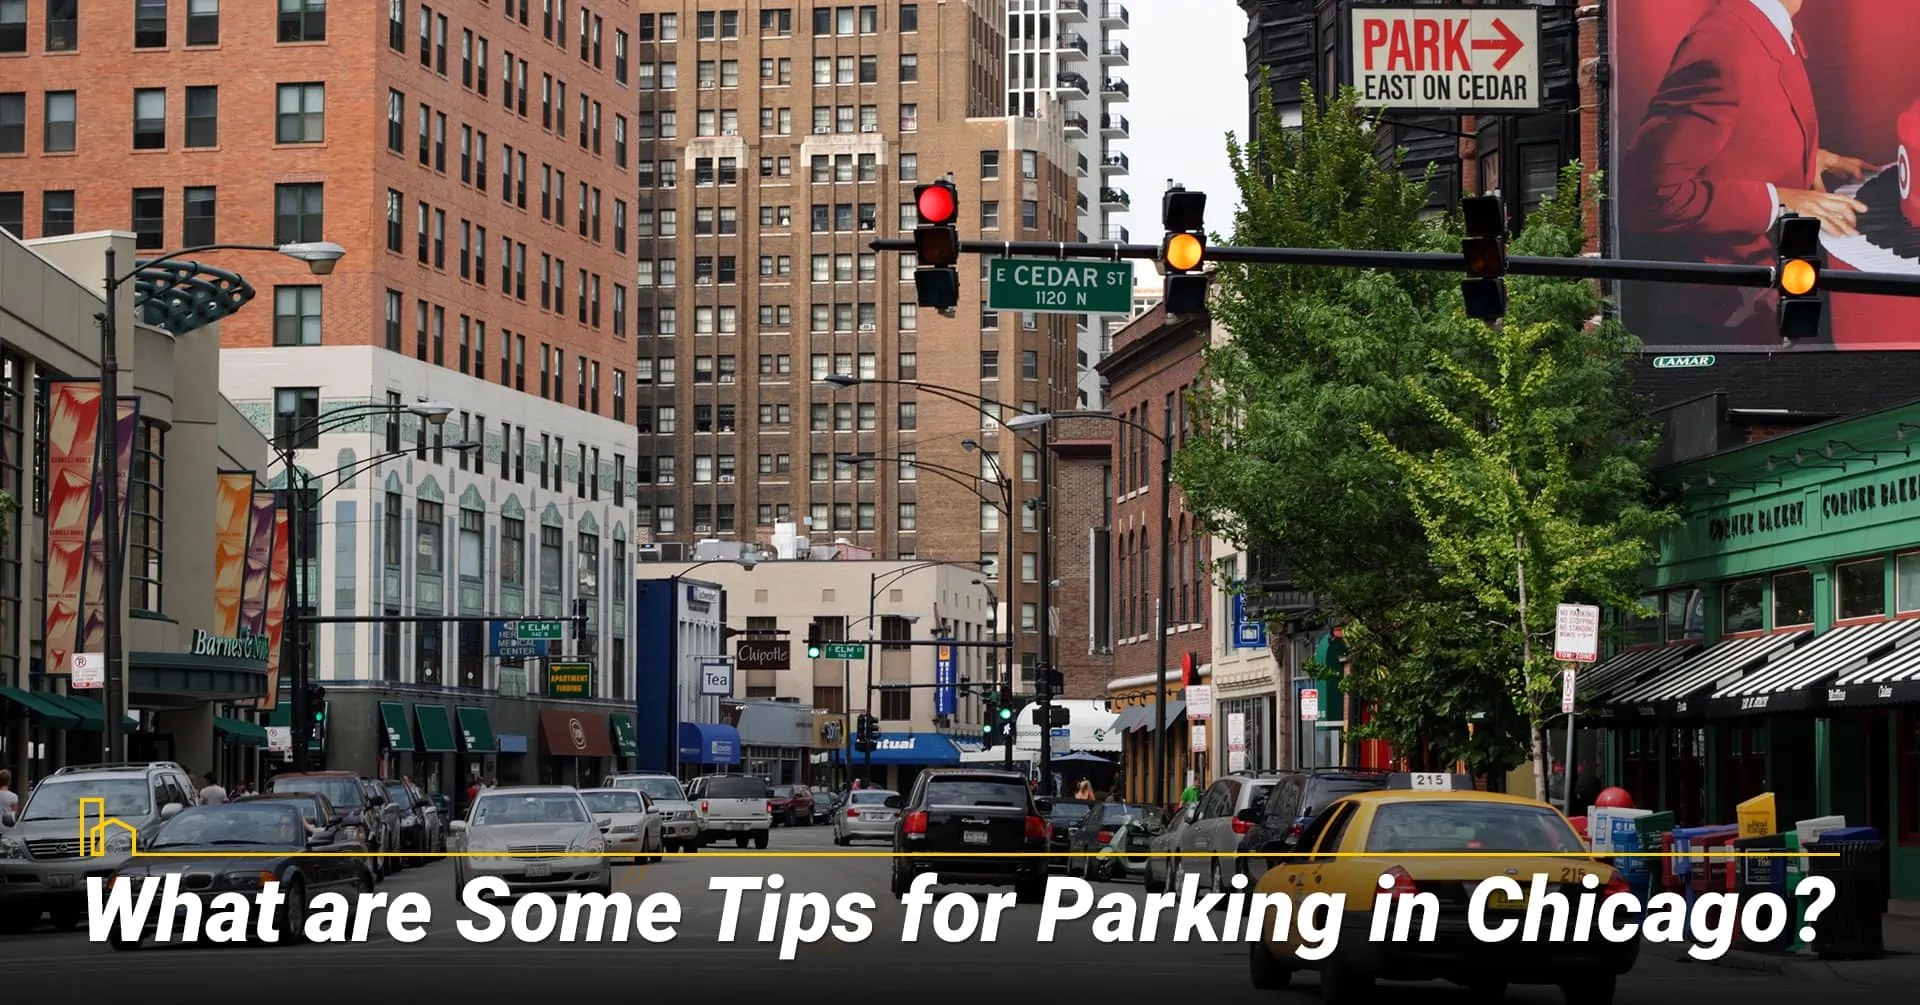 What are Some Tips for Parking in Chicago?